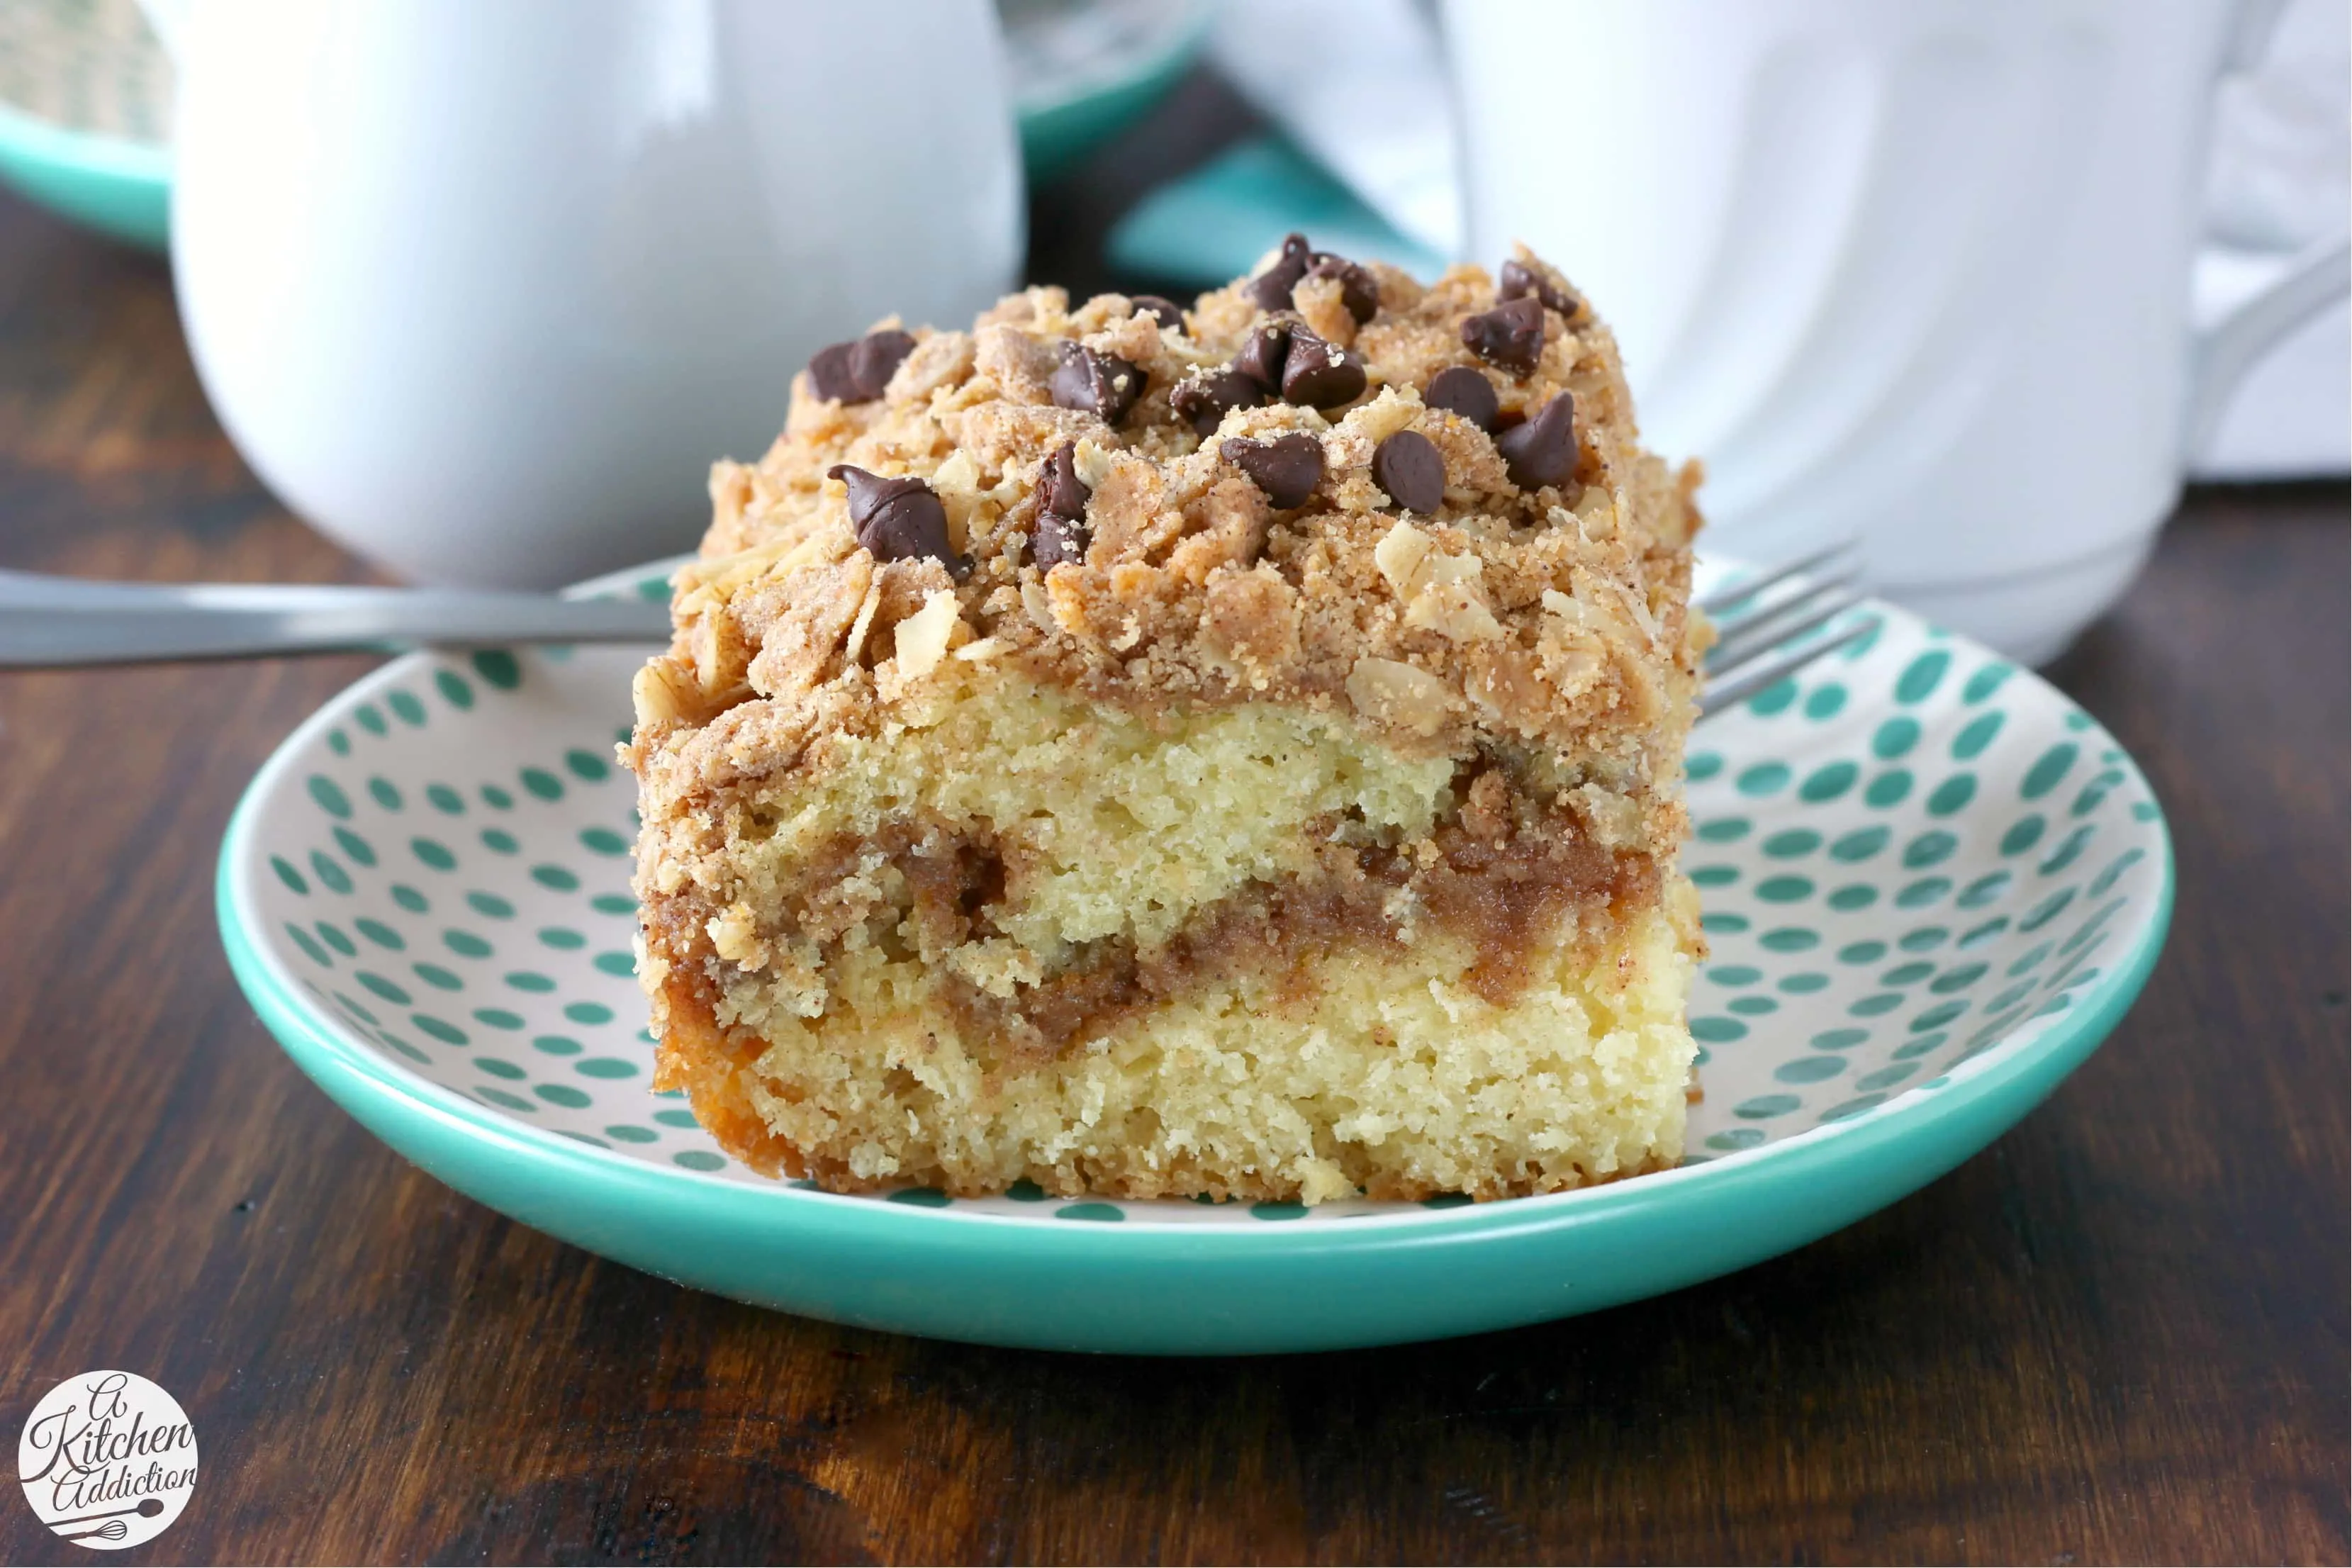 Peanut Butter Crumble Coffee Cake Recipe from A Kitchen Addiction